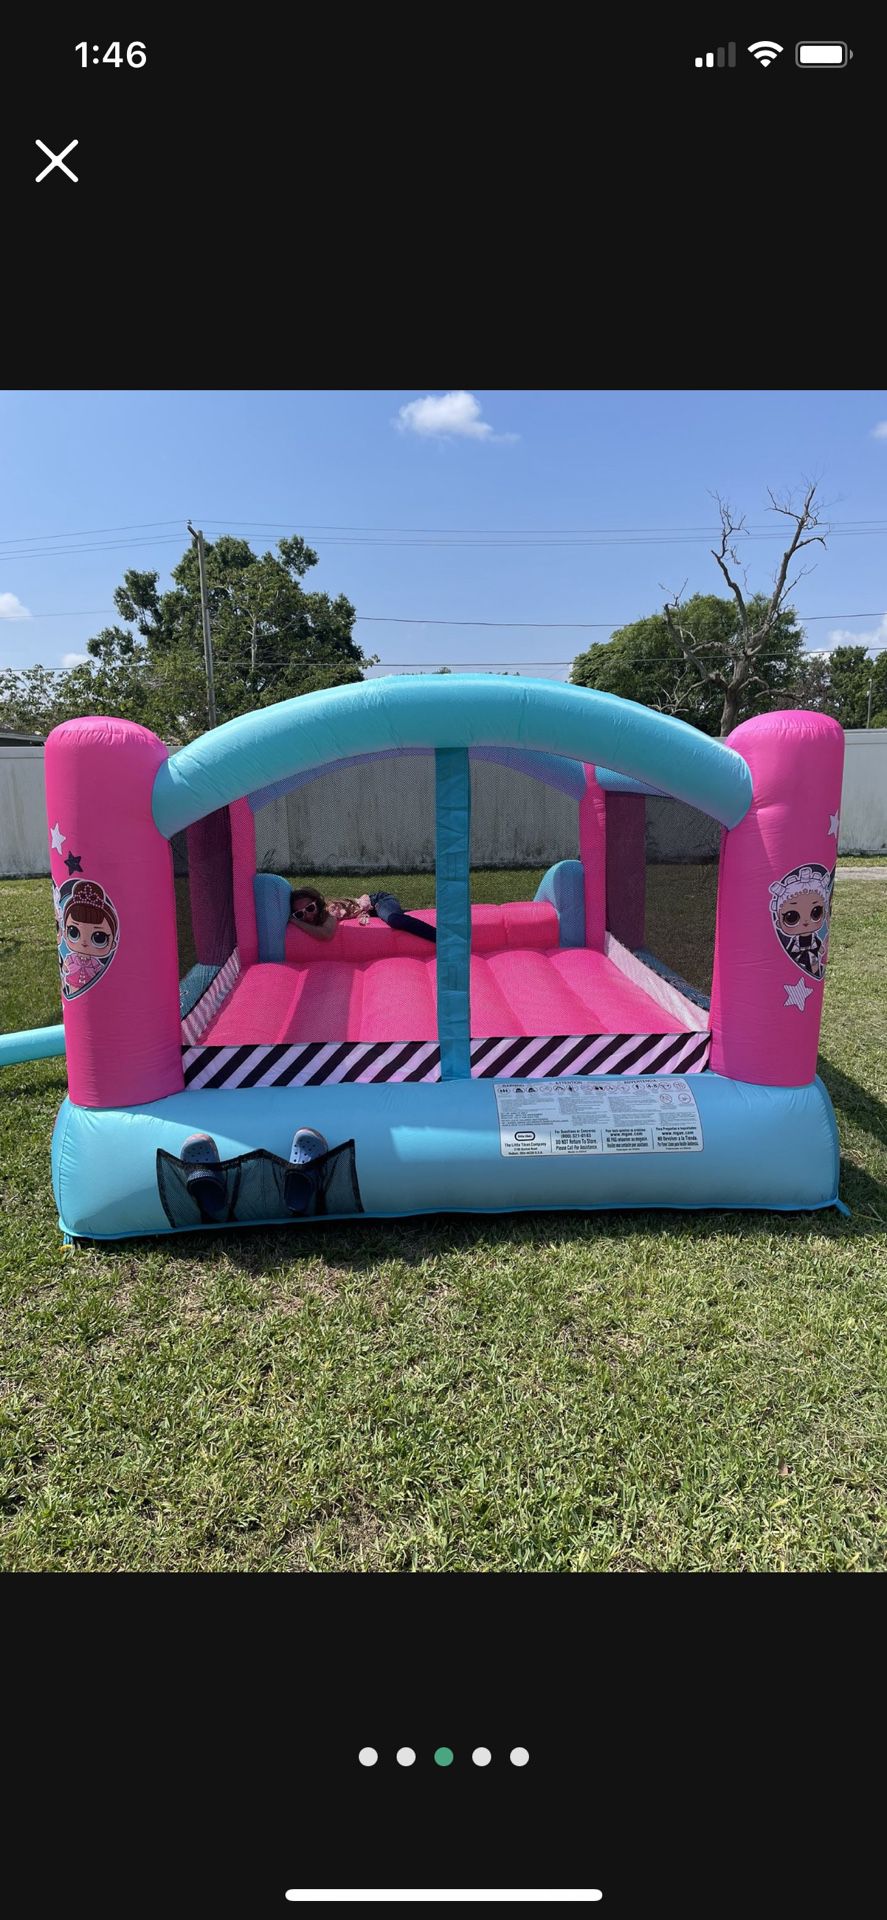 L.O.L Surprise jump and slide inflatable bounce house